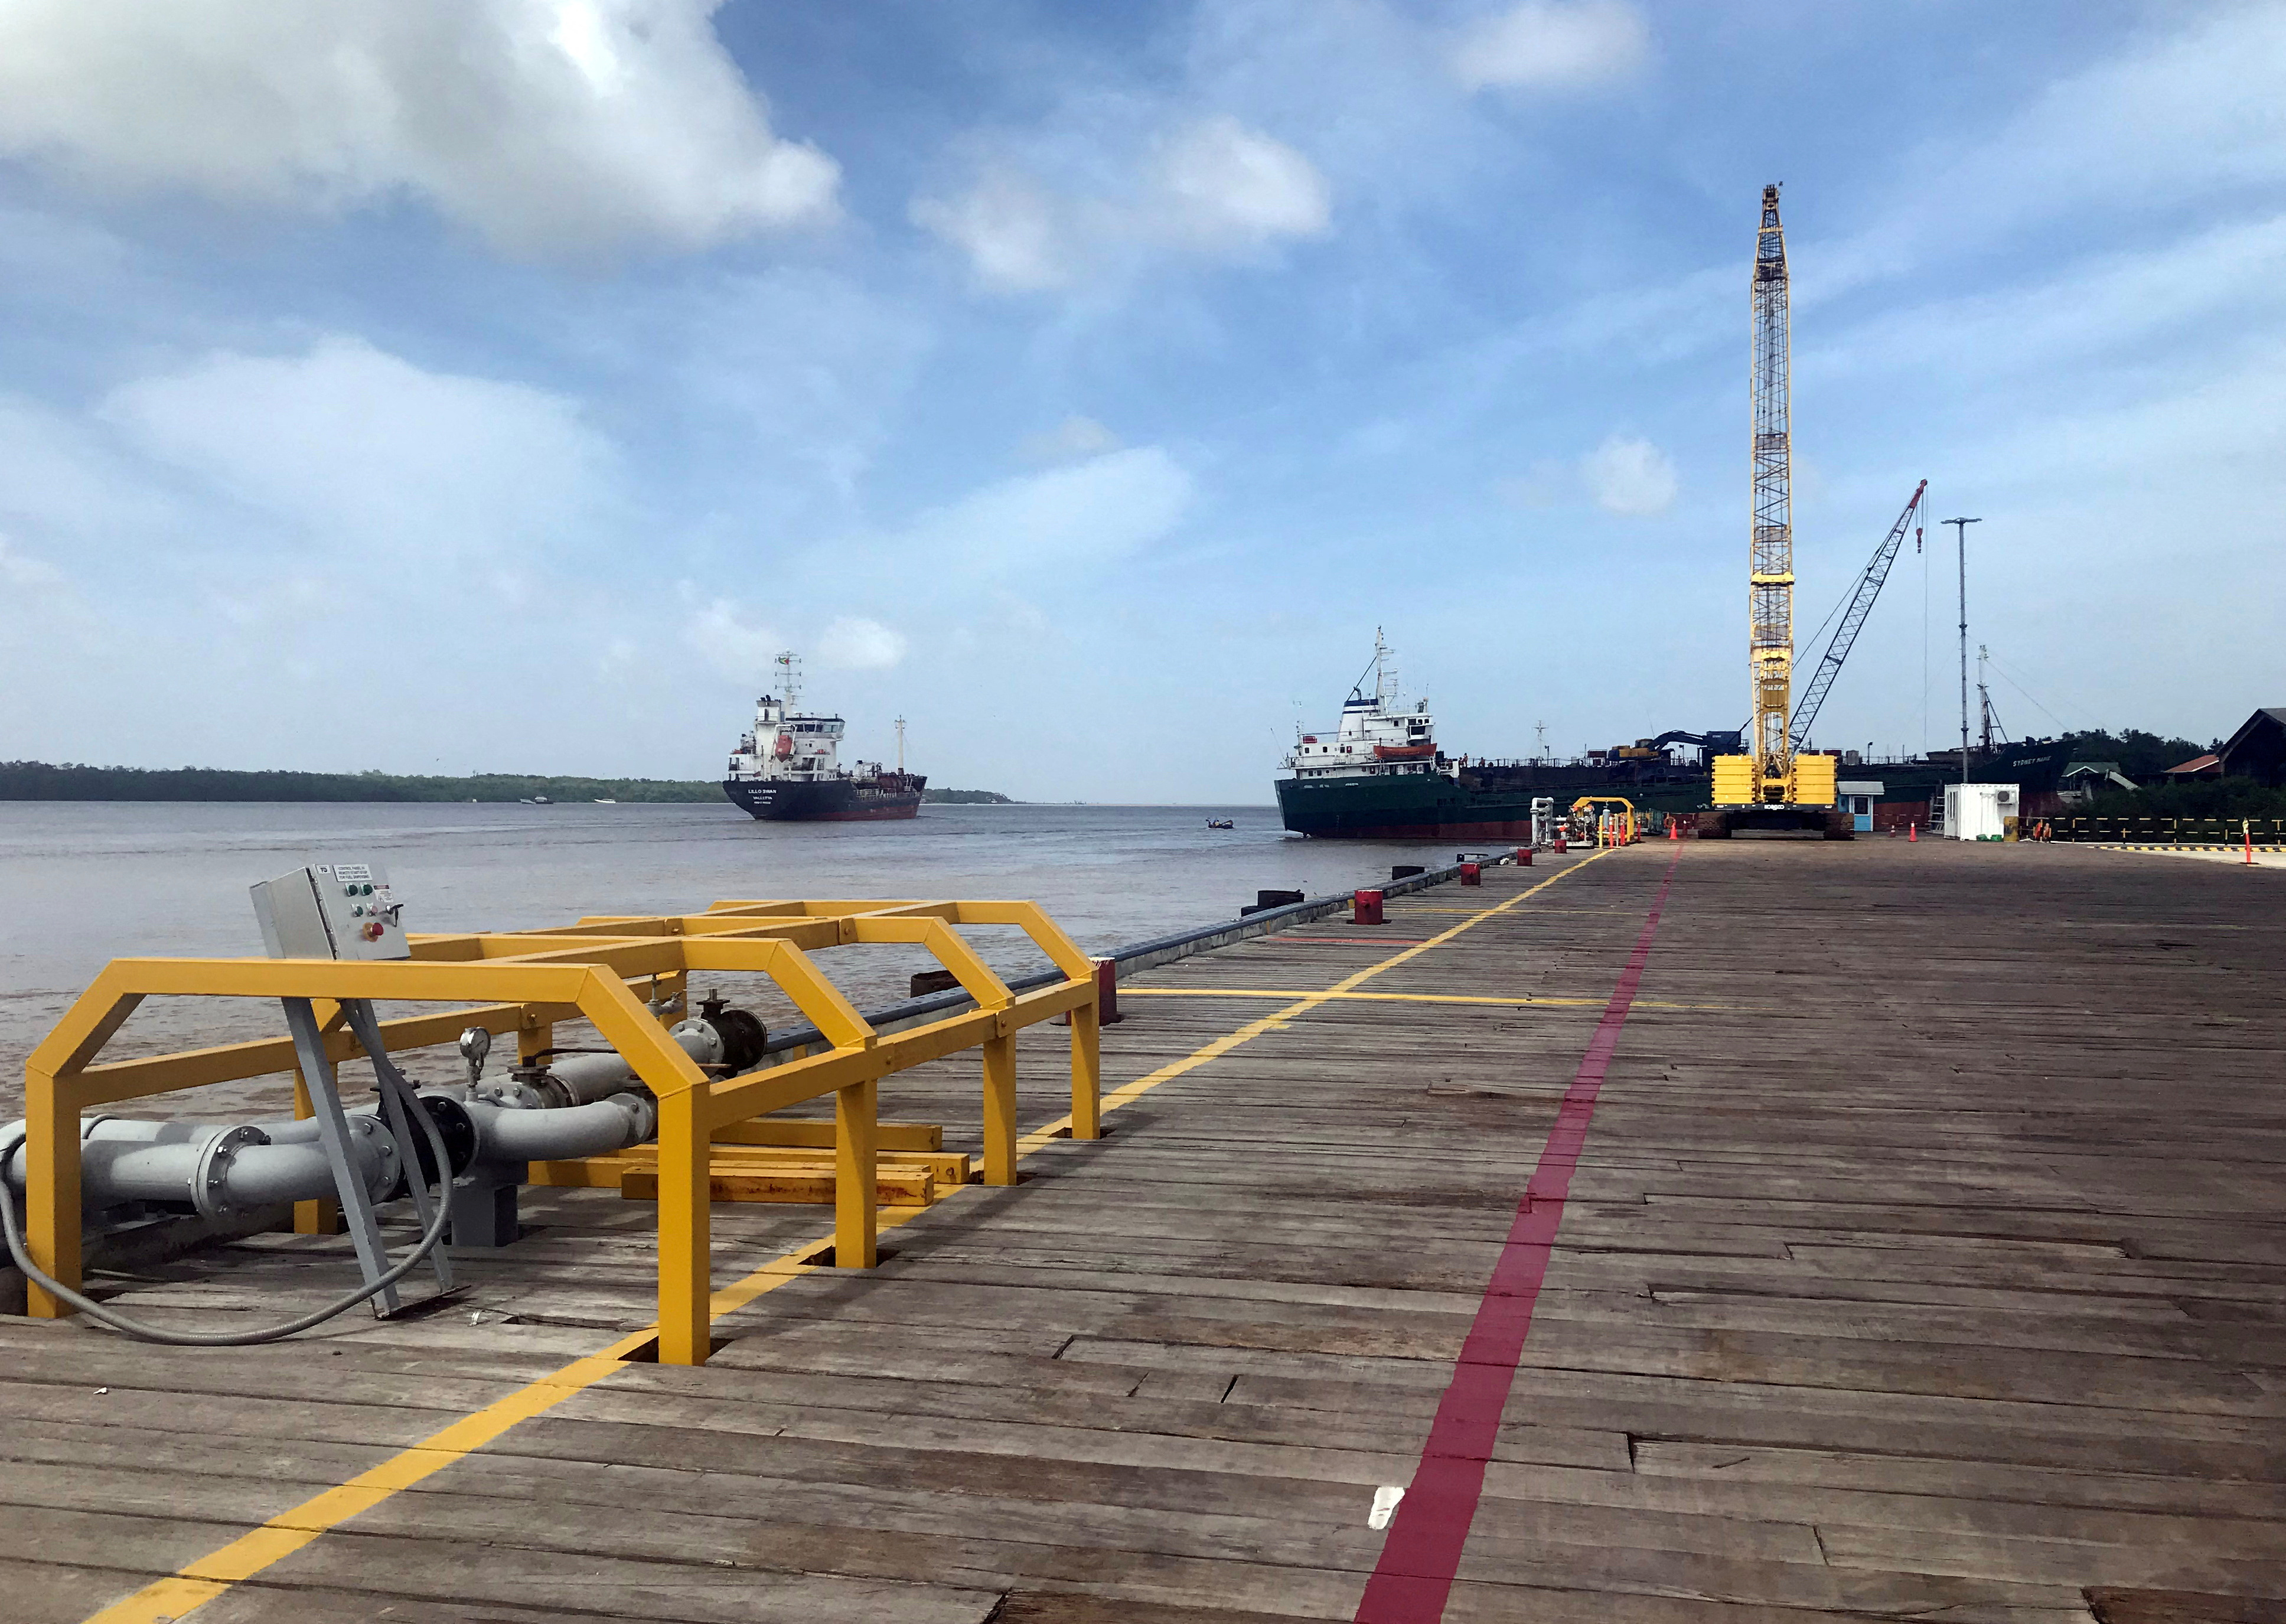 Vessels carrying supplies for an offshore oil platform operated by Exxon Mobil are seen at the Guyana Shore Base Inc wharf on the Demerara River south of Georgetown